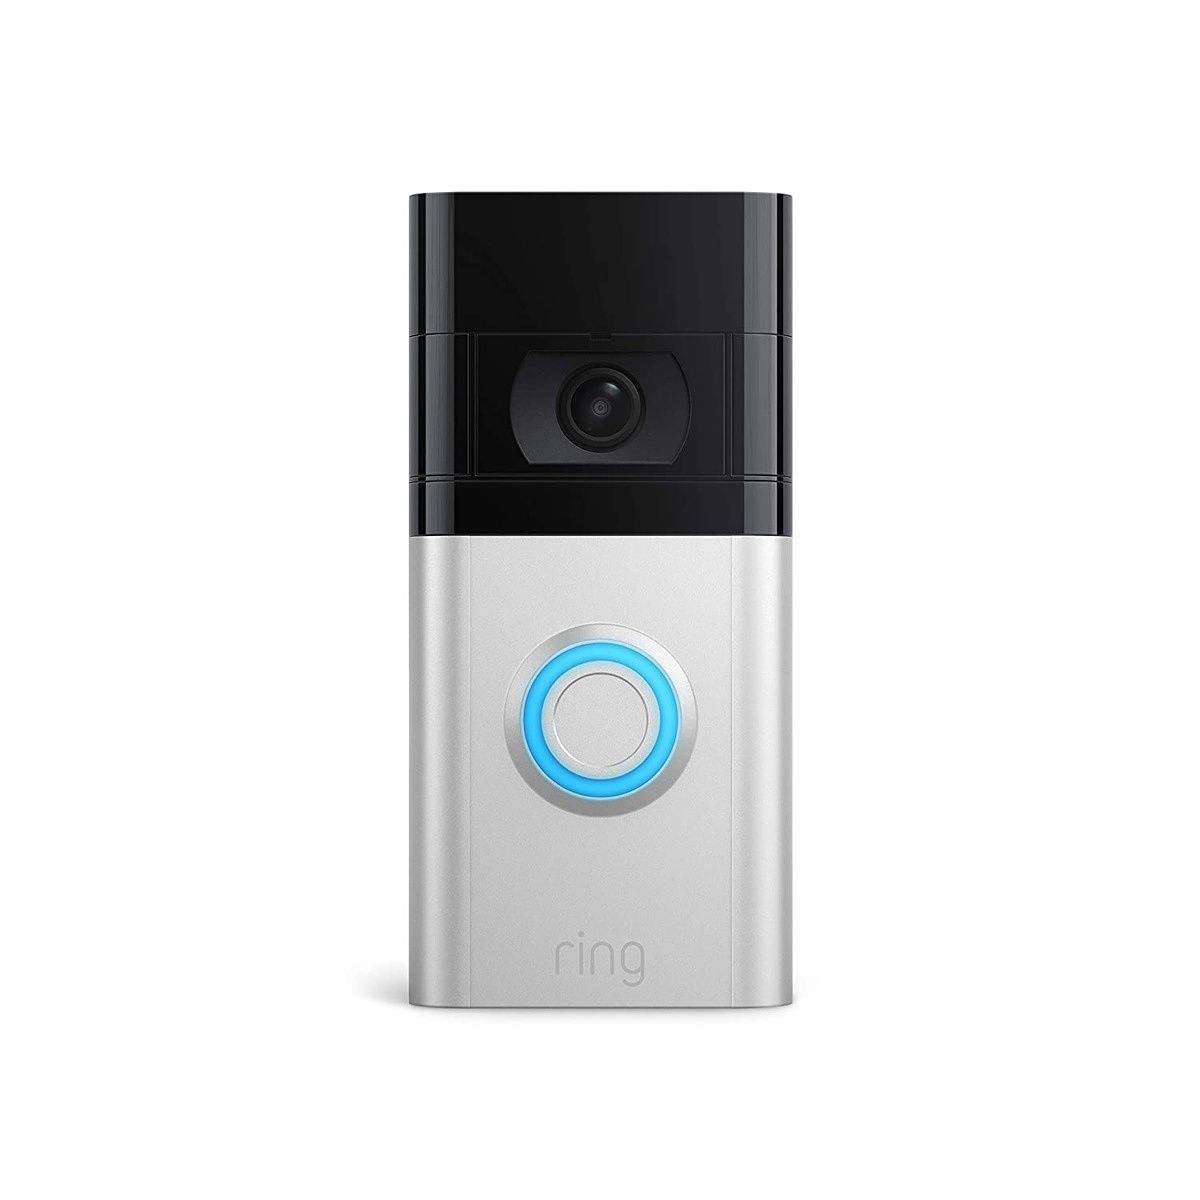 The Ring Video Doorbell 4 has a 1080p camera. It supports both batteries and direct, wired power sources.